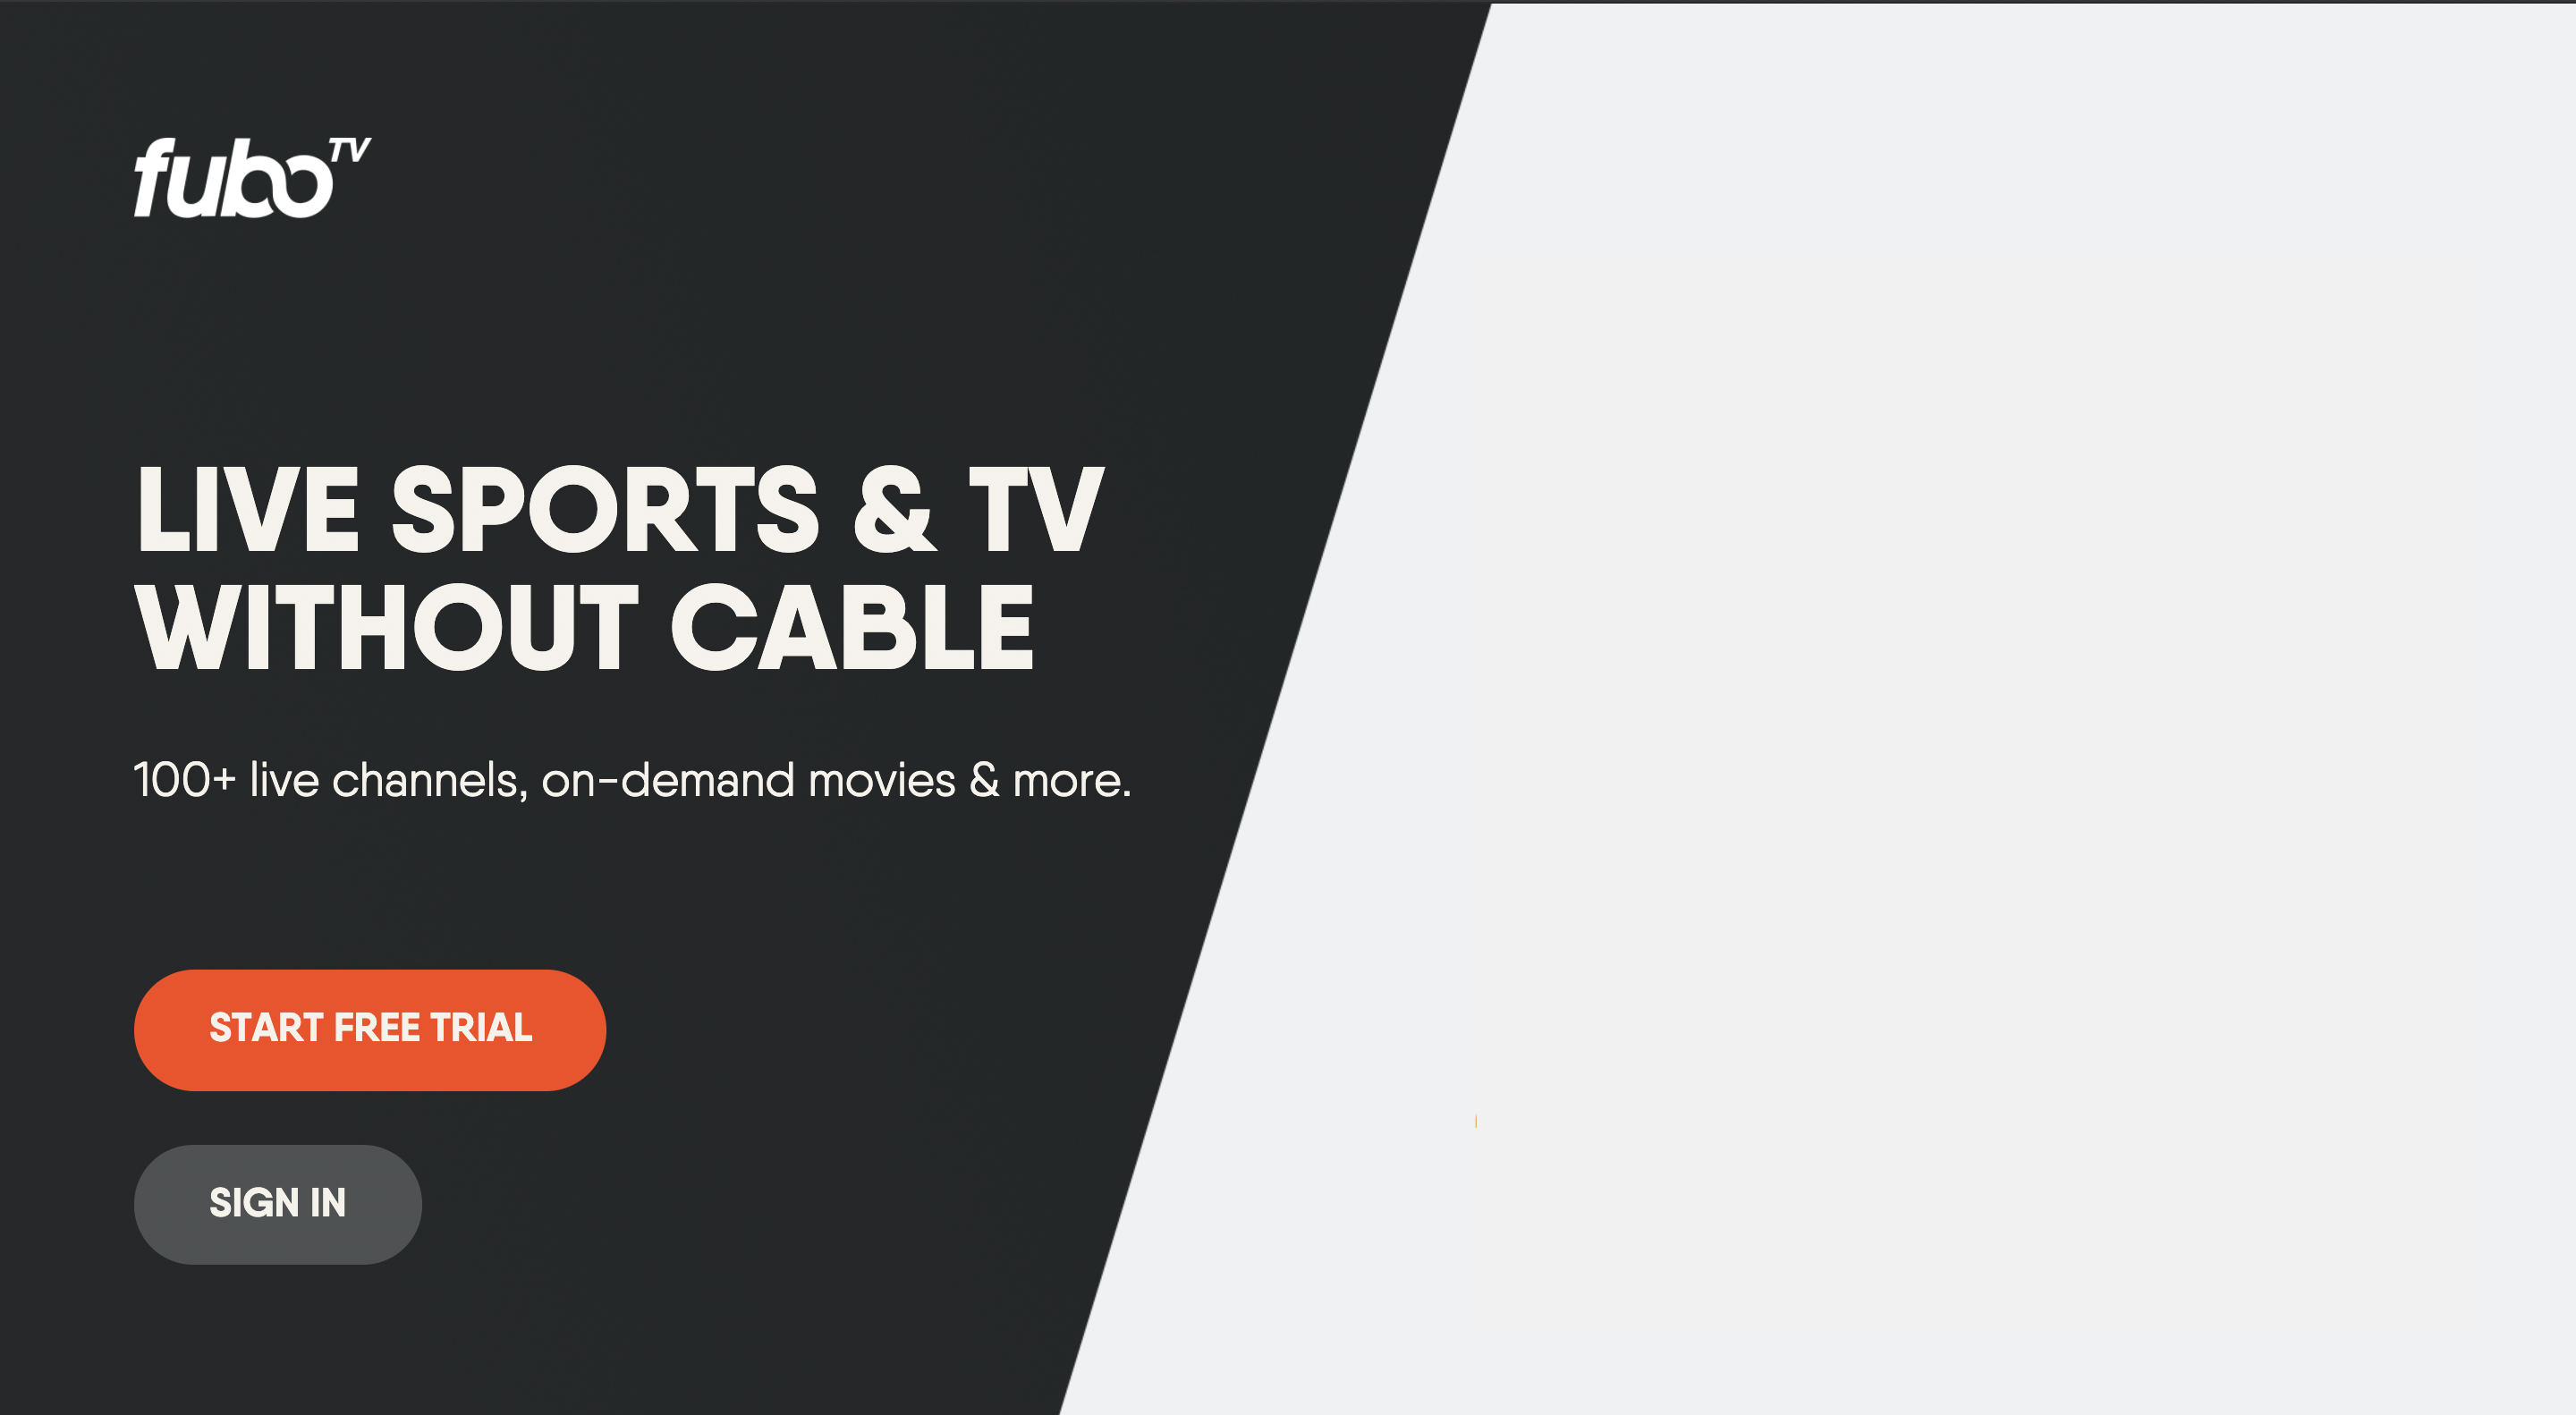 Sign in screen for the FuboTV app on Vizio TV with options to sign in or get signup details